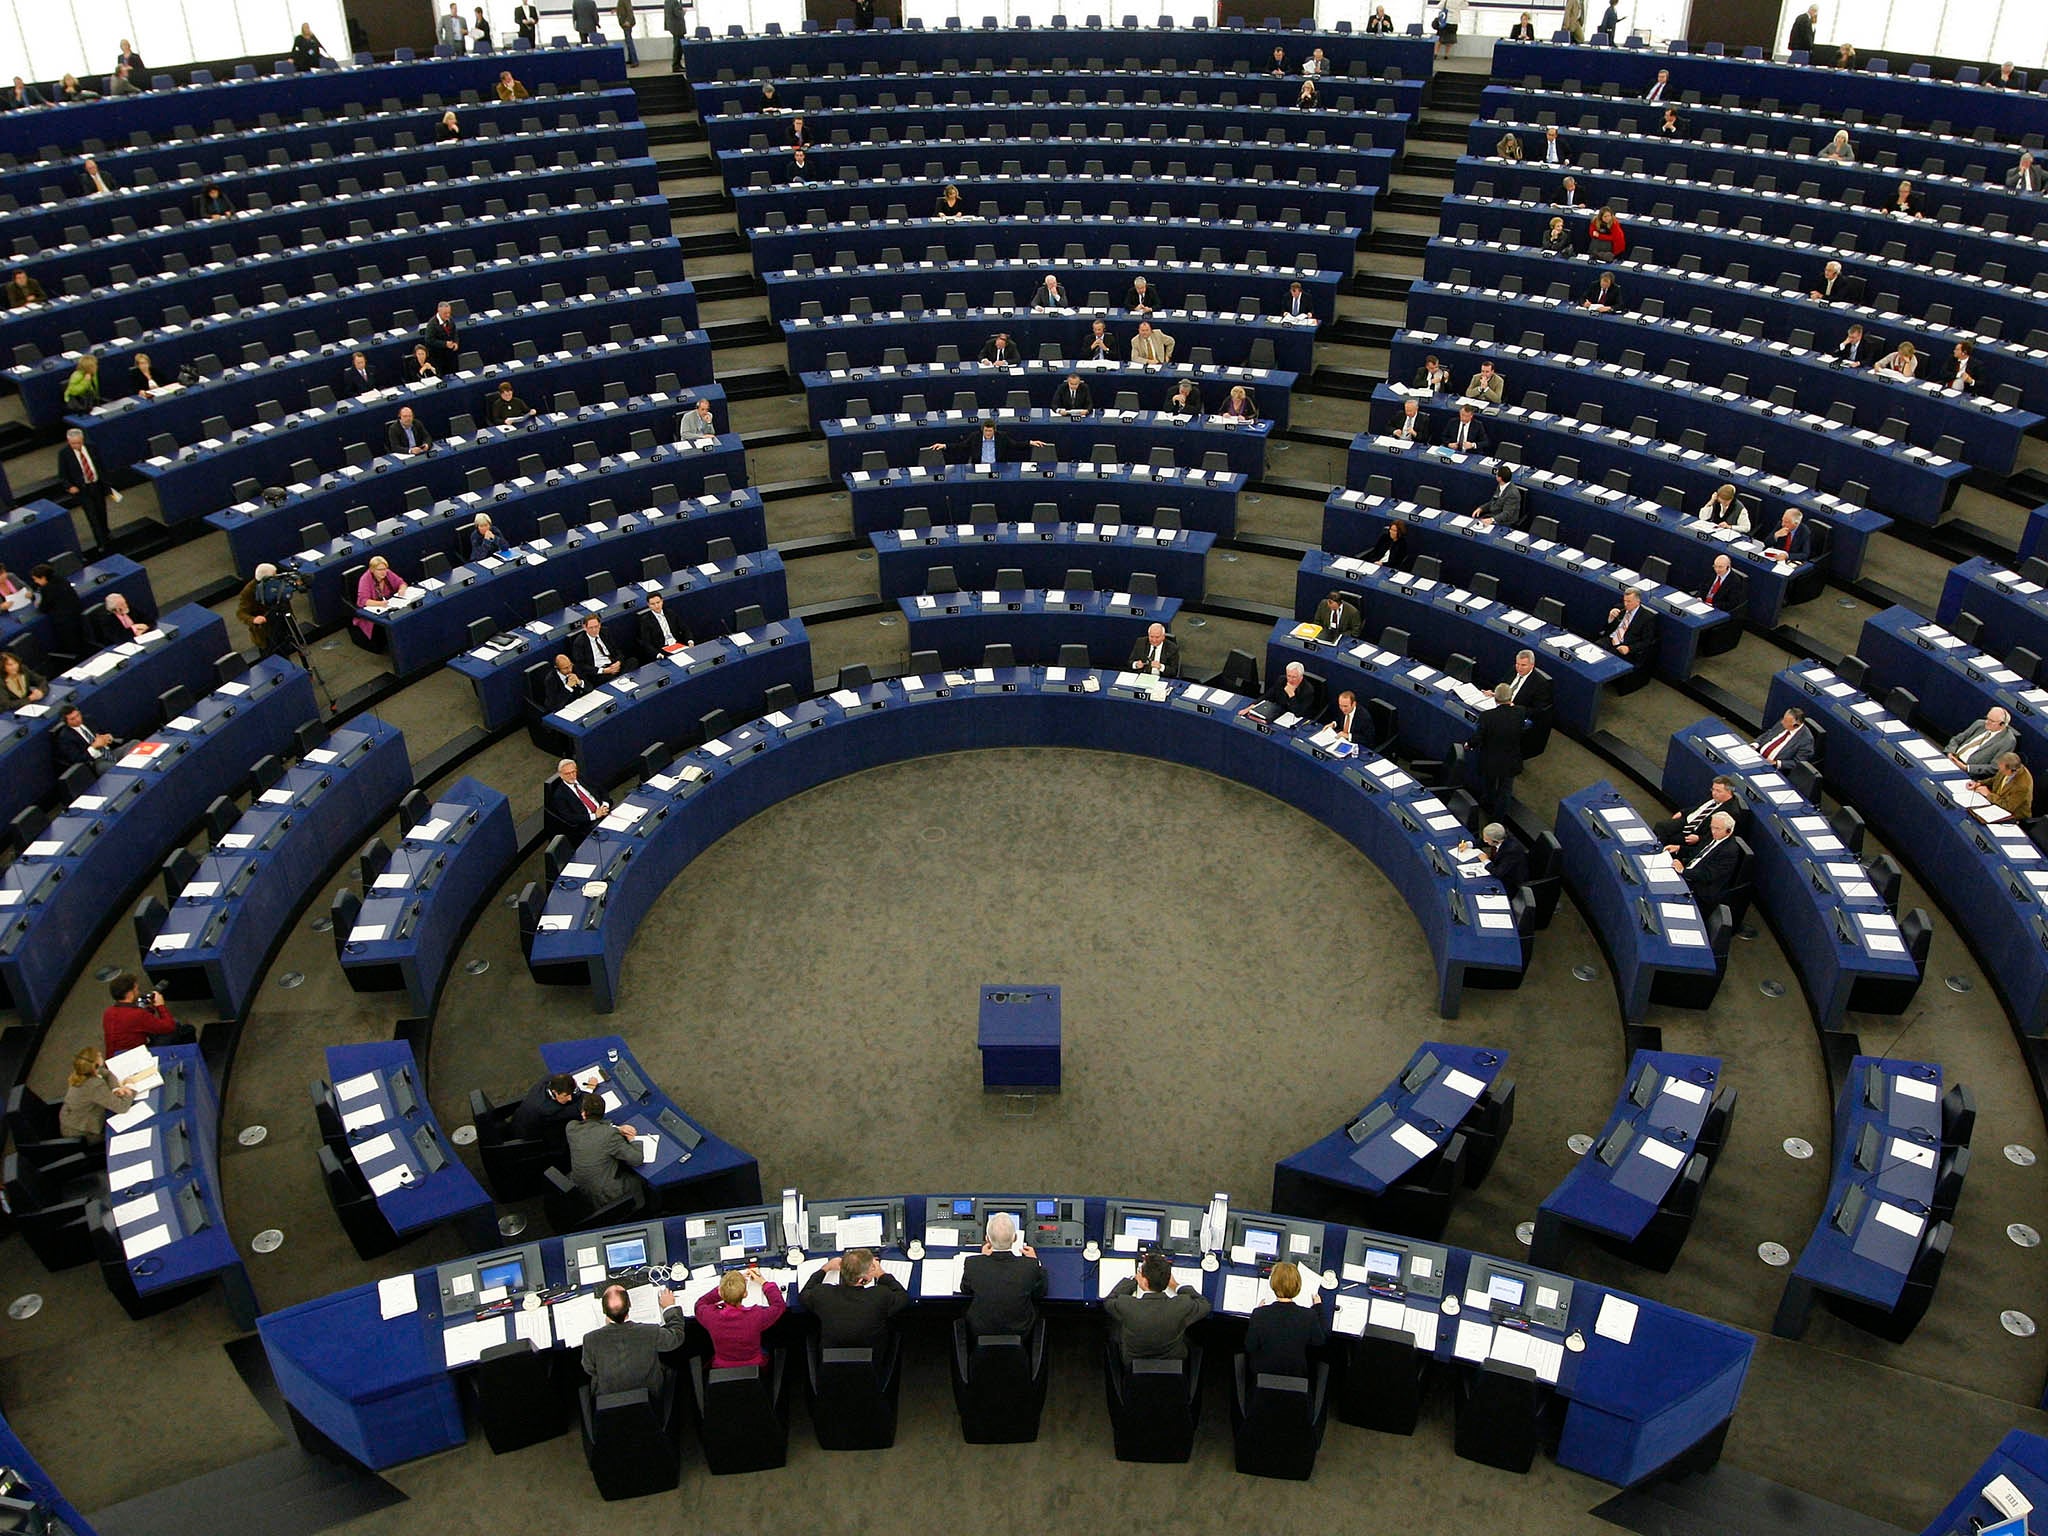 MEPs overwhelmingly backed the motion ahead of a summit